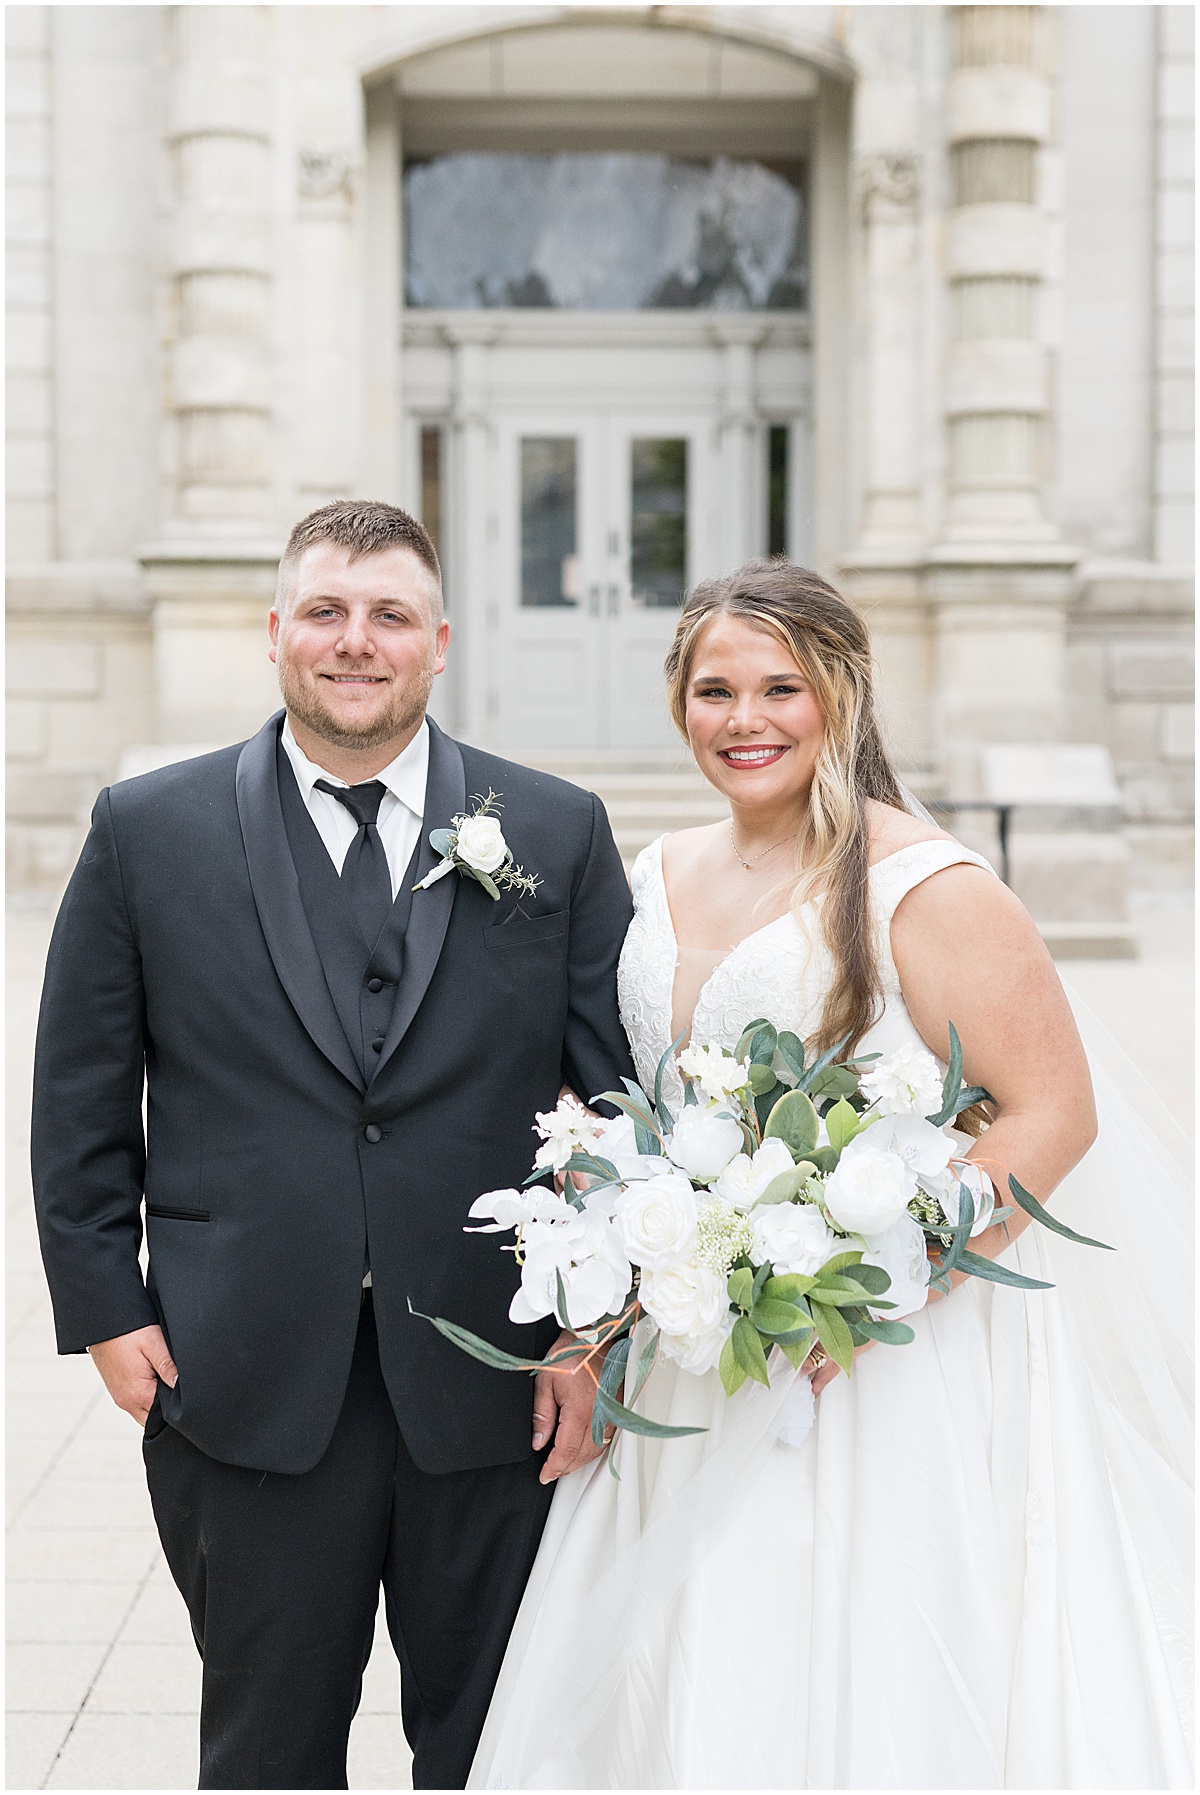 Bride and groom in front of doorway for wedding photos at Hamilton County Courthouse in downtown Noblesville, Indiana 